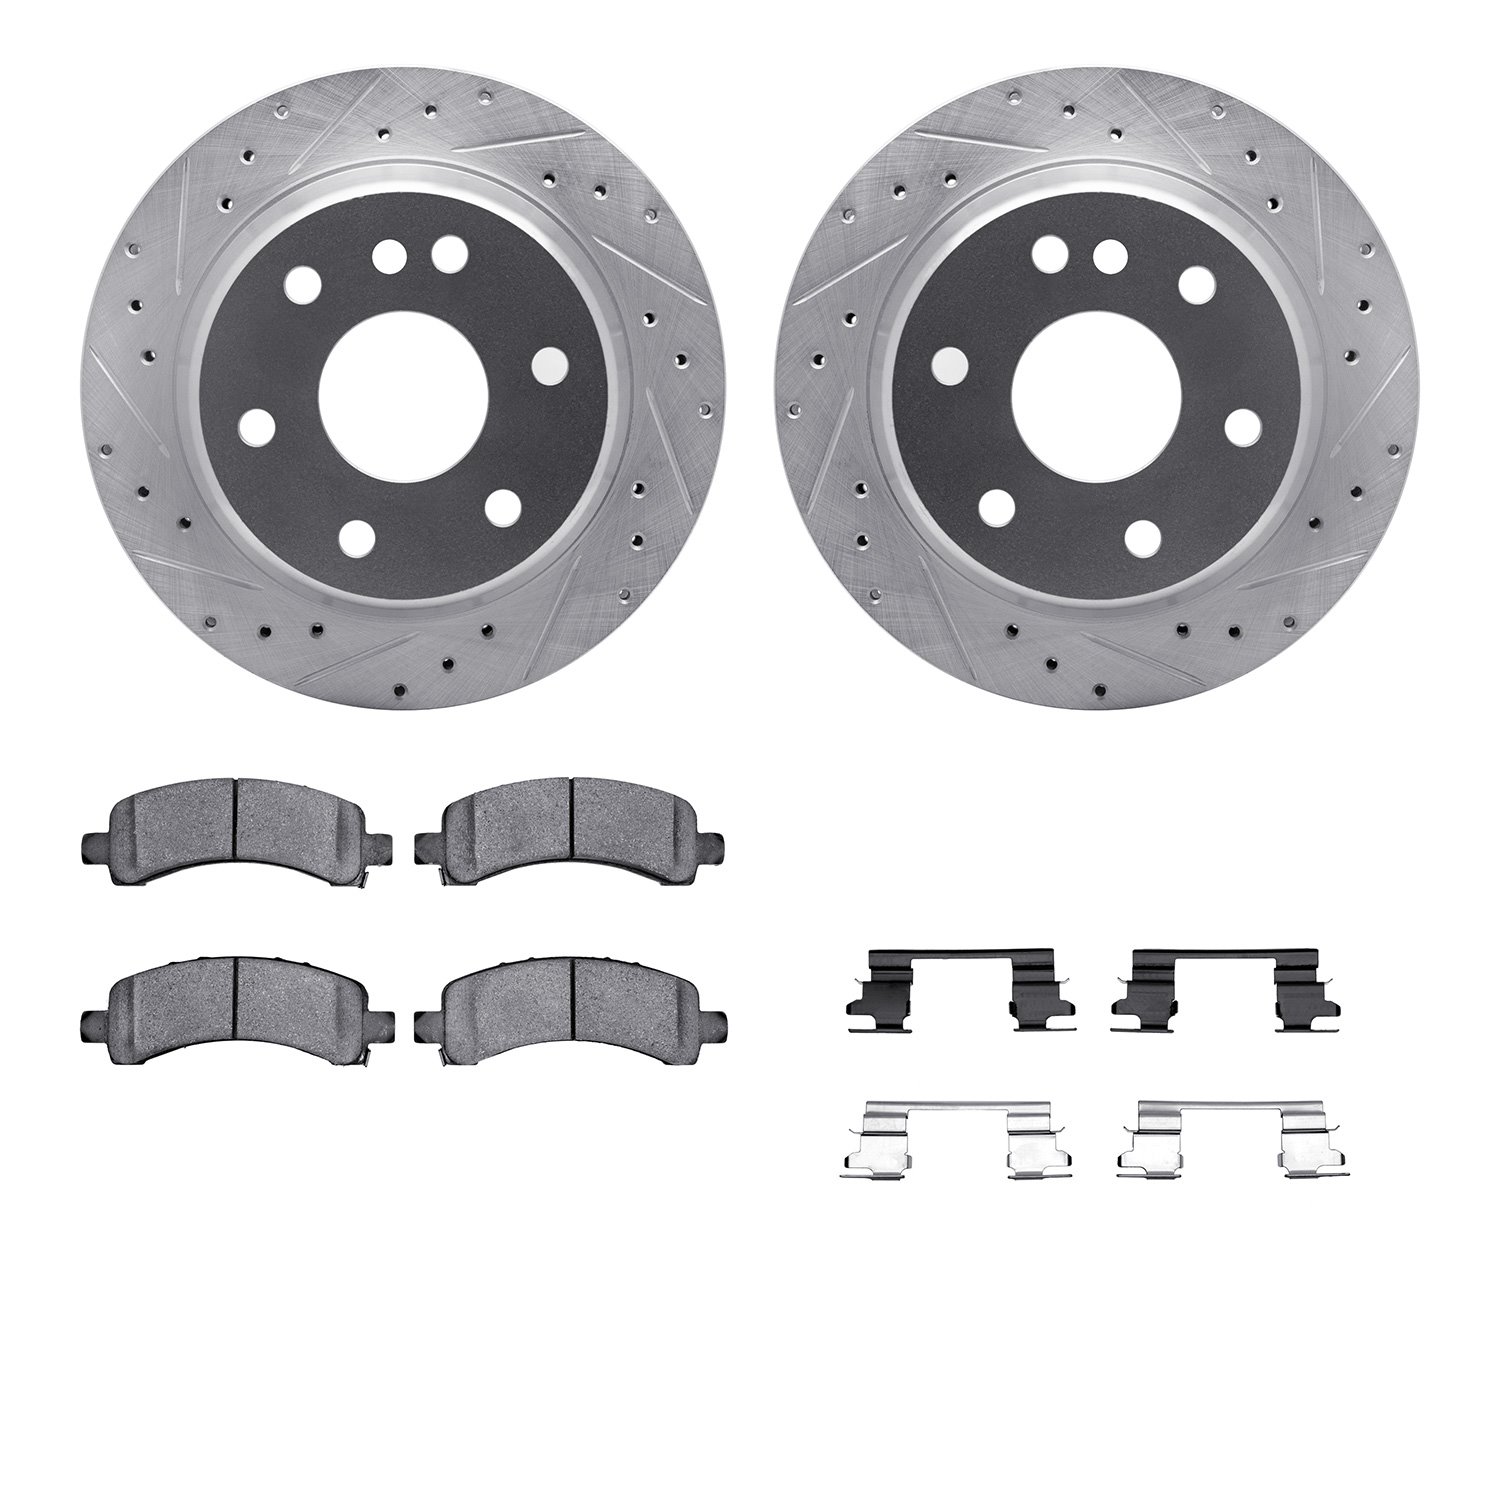 7412-48029 Drilled/Slotted Brake Rotors with Ultimate-Duty Brake Pads Kit & Hardware [Silver], 2002-2014 GM, Position: Rear